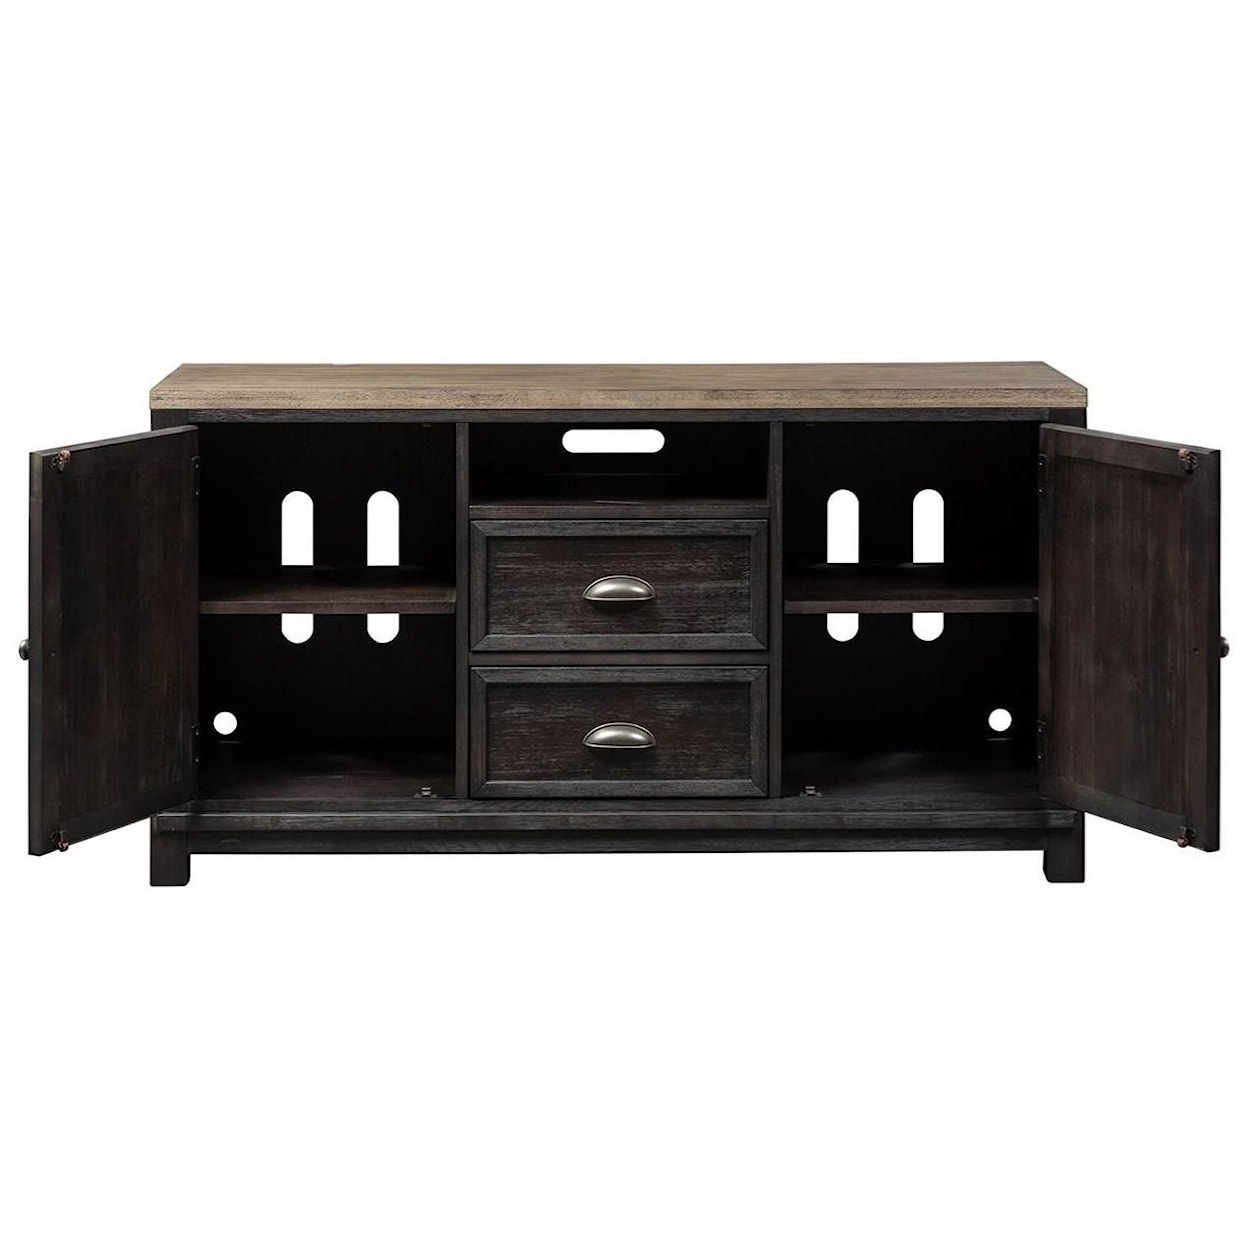 Libby Heatherbrook 56 Inch TV Console